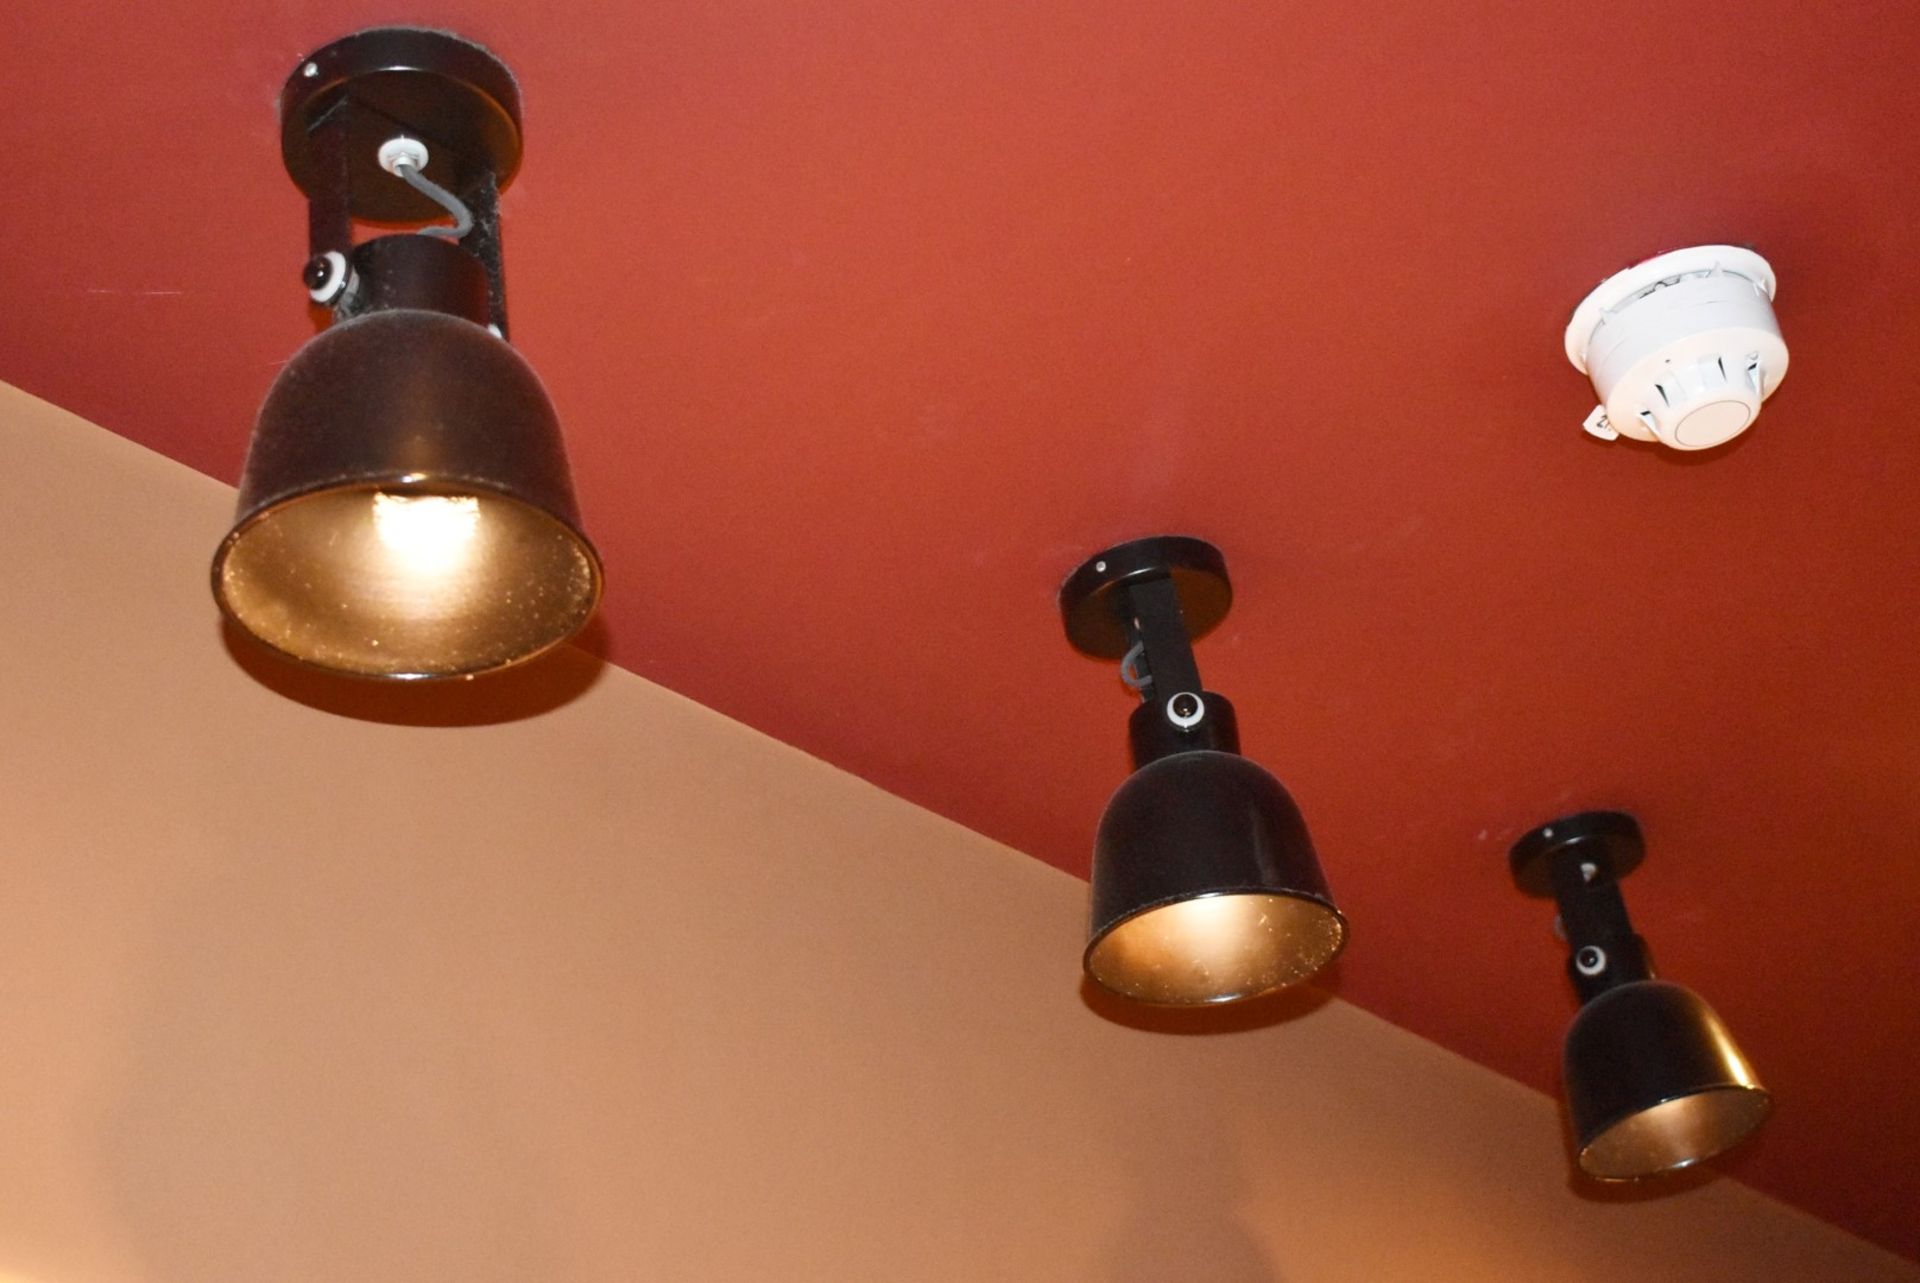 10 x Adjustable Spot Lights With a Black Finish - Image 2 of 5